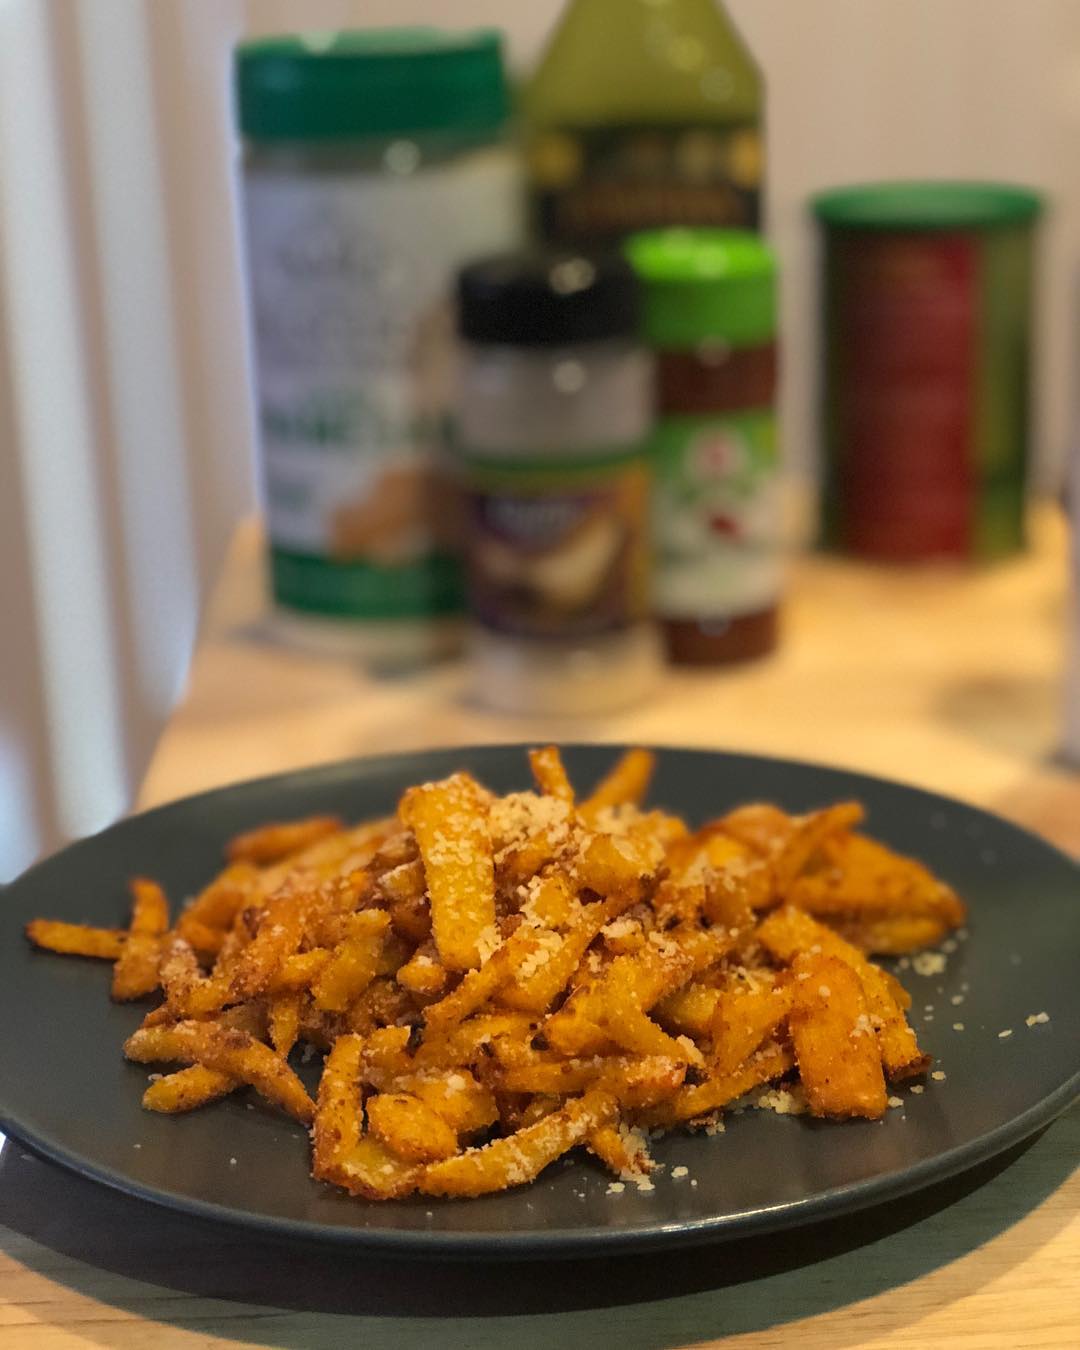 Today I made pumpkin fries! Since Google says pumpkin has 8 g of carbs per cup, this is a great alternative to your regular french fries. I’m going to have to play around with the recipe a little bit more because they didn’t come out as crispy as I would’ve liked them to, but they still tasted awesome; which I was surprised!Finding pumpkin this time of year was a little bit difficult but when I walked in the whole foods they had baking pumpkins sitting there. I grabbed a medium size one and was able to make pumpkin fries out of half of it, pumpkin cheesecake out of the other half, and pumpkin seeds I roasted. Pretty cool to use the entire pumpkin to make a bunch of keto treats!
——
I cut half of the pumpkin after peeling it, into fries. I soaked them in water overnight, I dried them with a paper towel and then I dusted a couple teaspoons of cornstarch on the whole entire batch in a big ziplock bag to hopefully help it be crispier out of the oven. I laid them on parchment paper not touching each other and then put them in the over at 425 for 15 minutes flipping them about halfway through. After I pulled them out of the over, I dusted them with salt and grated Parmesan; yum